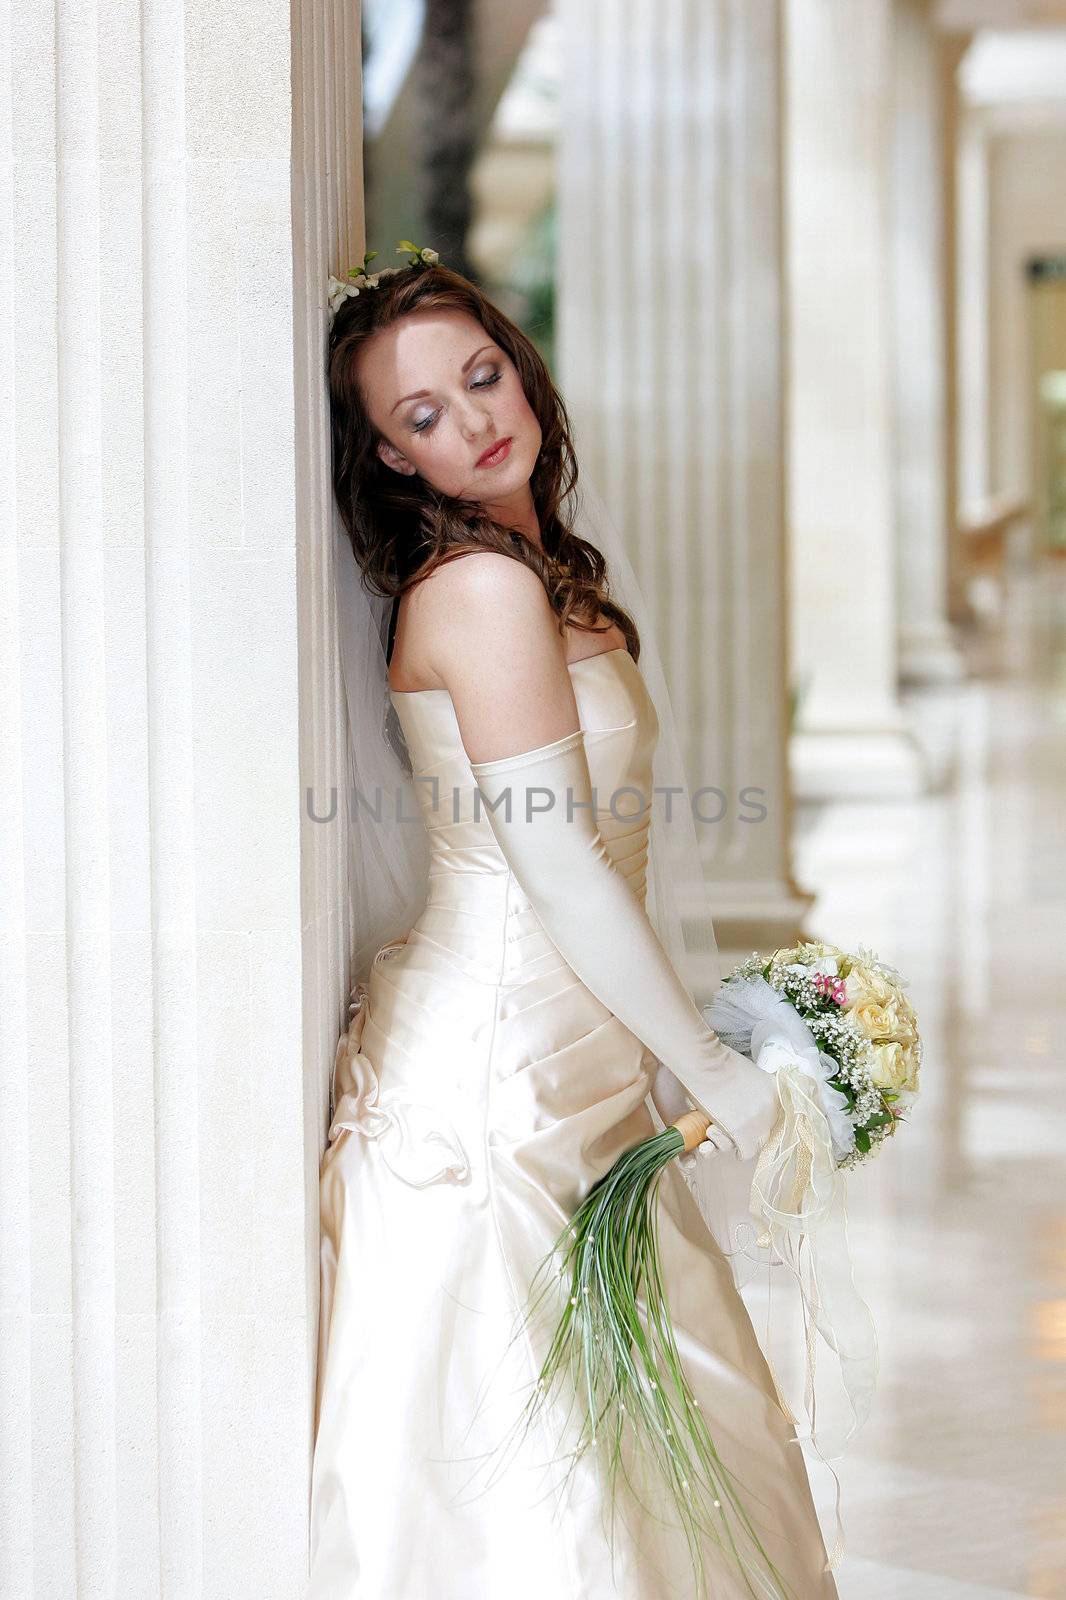 Pretty young adult bride wearing wedding dress and holding bouquet leaning on marble column, thoughtful expression.